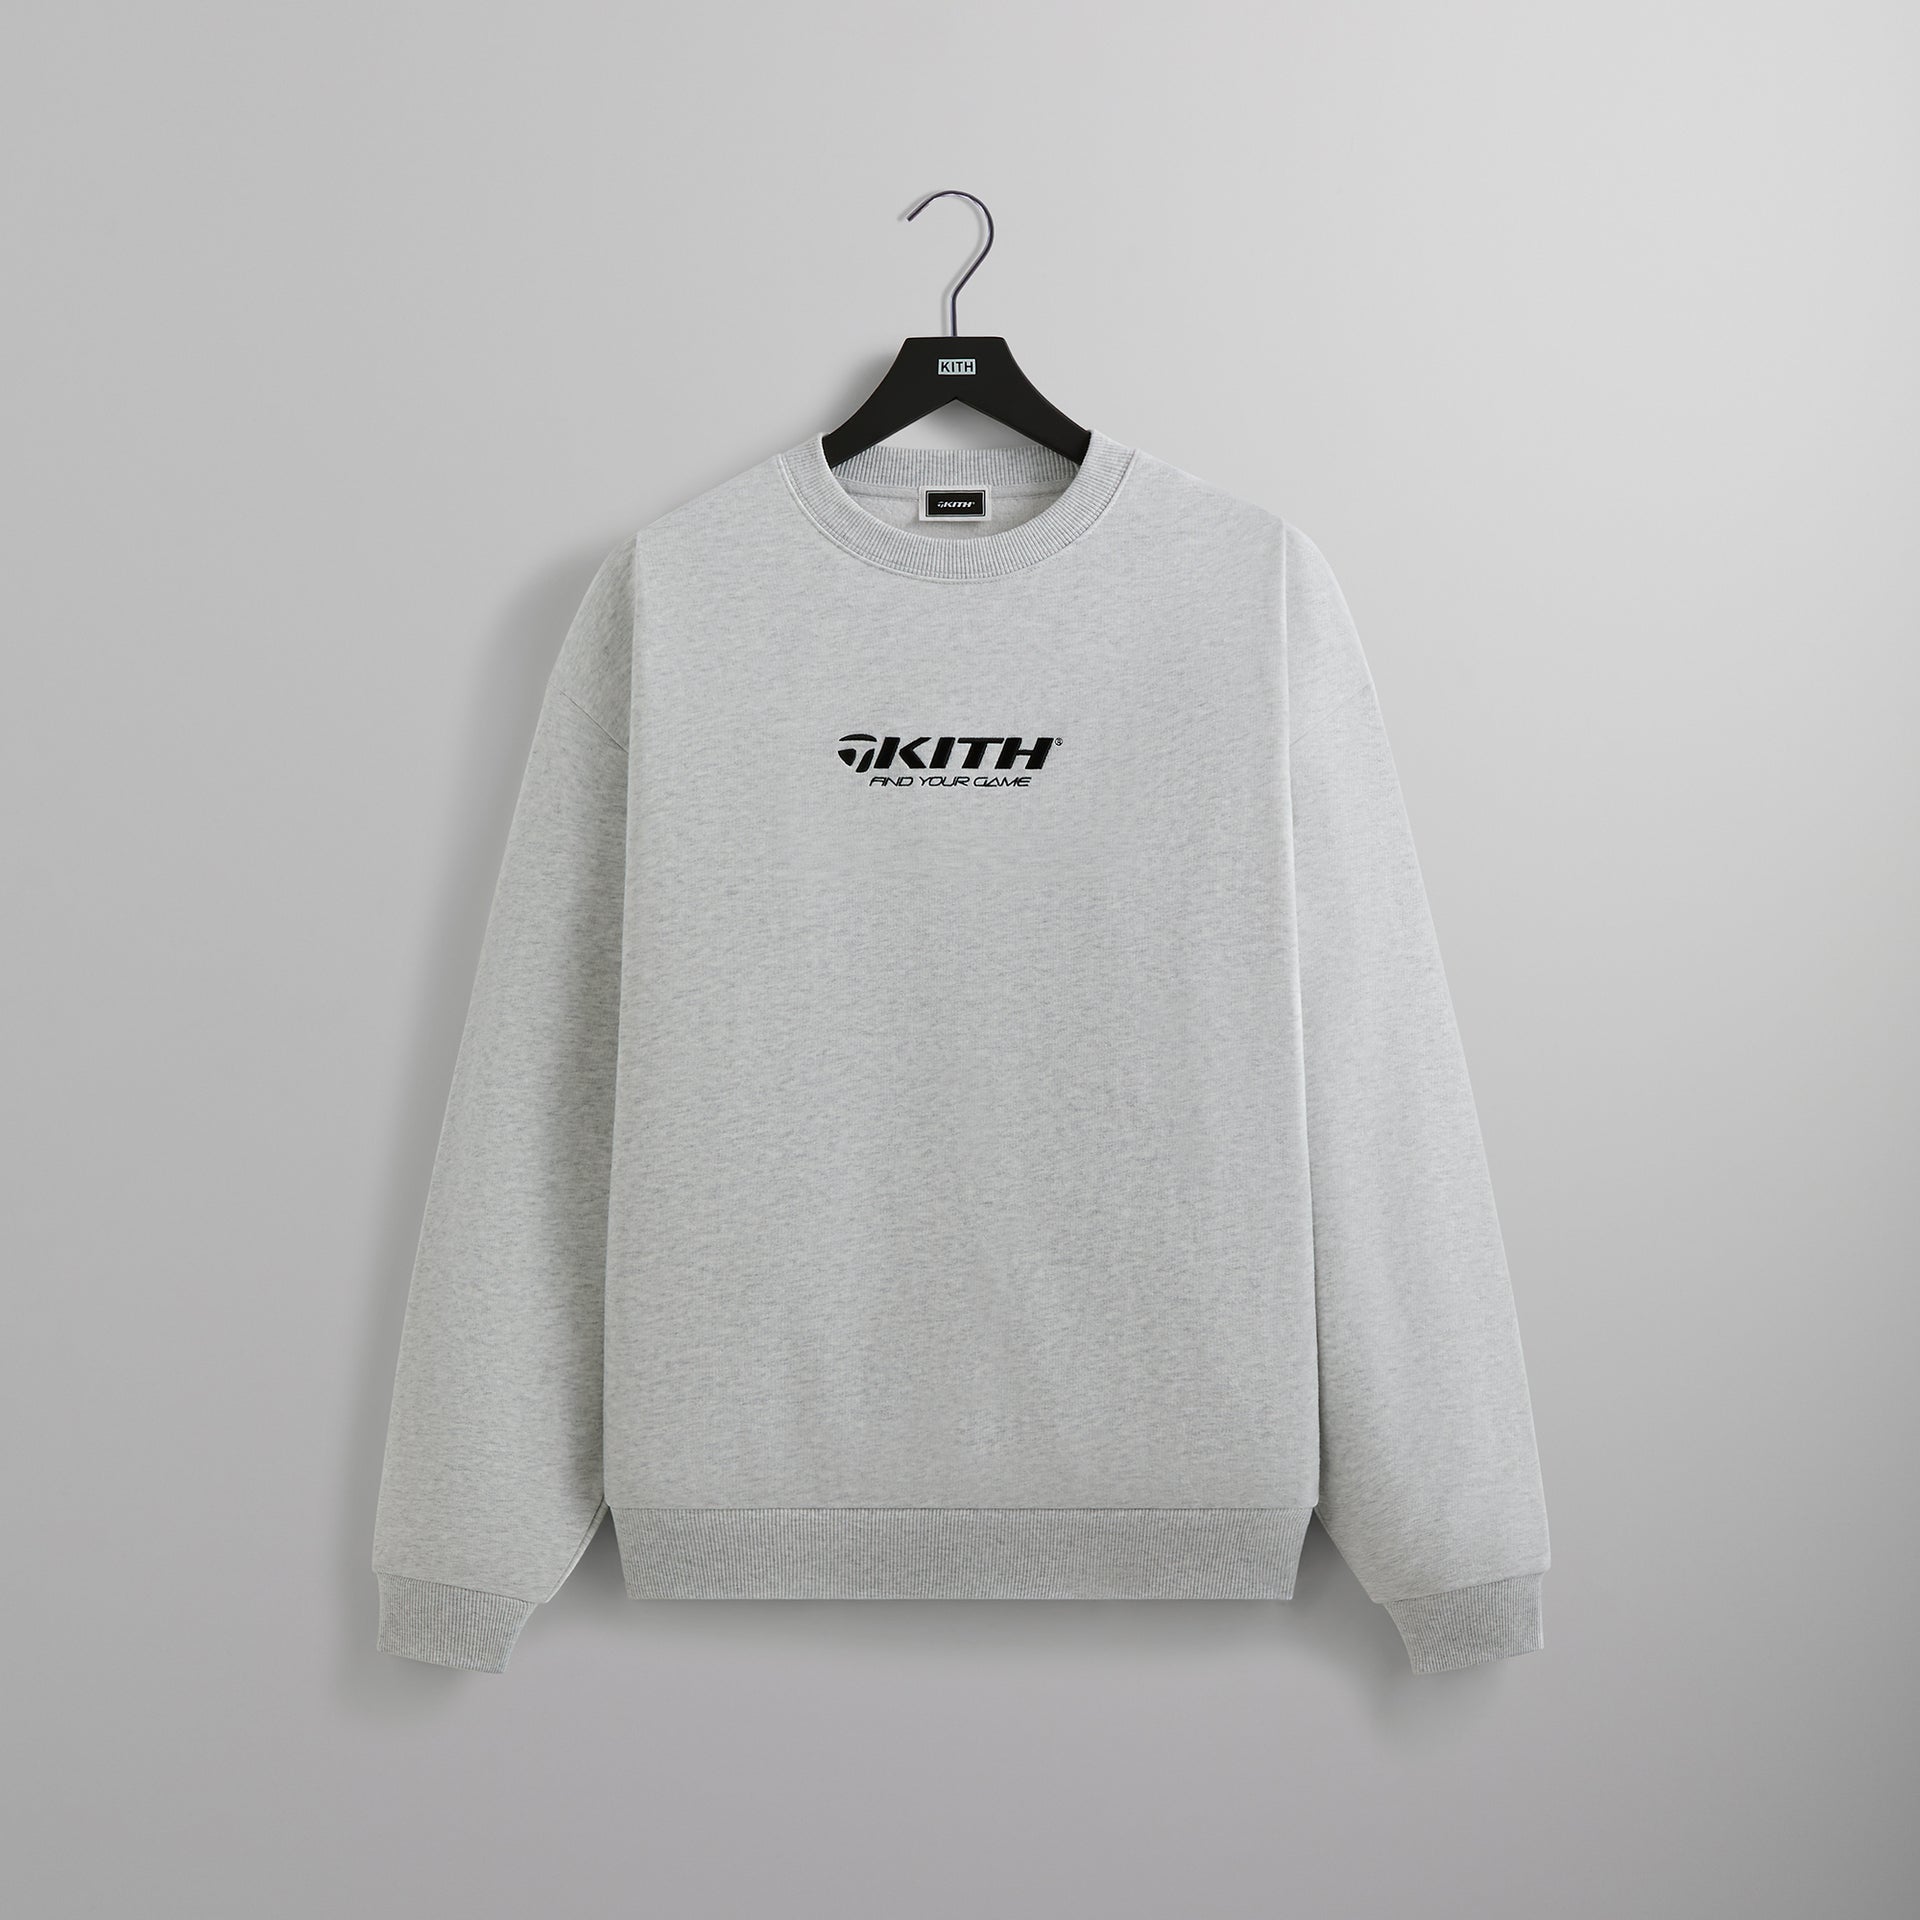 Kith for TaylorMade Find Your Game Nelson Crewneck - Light Heather Grey PH